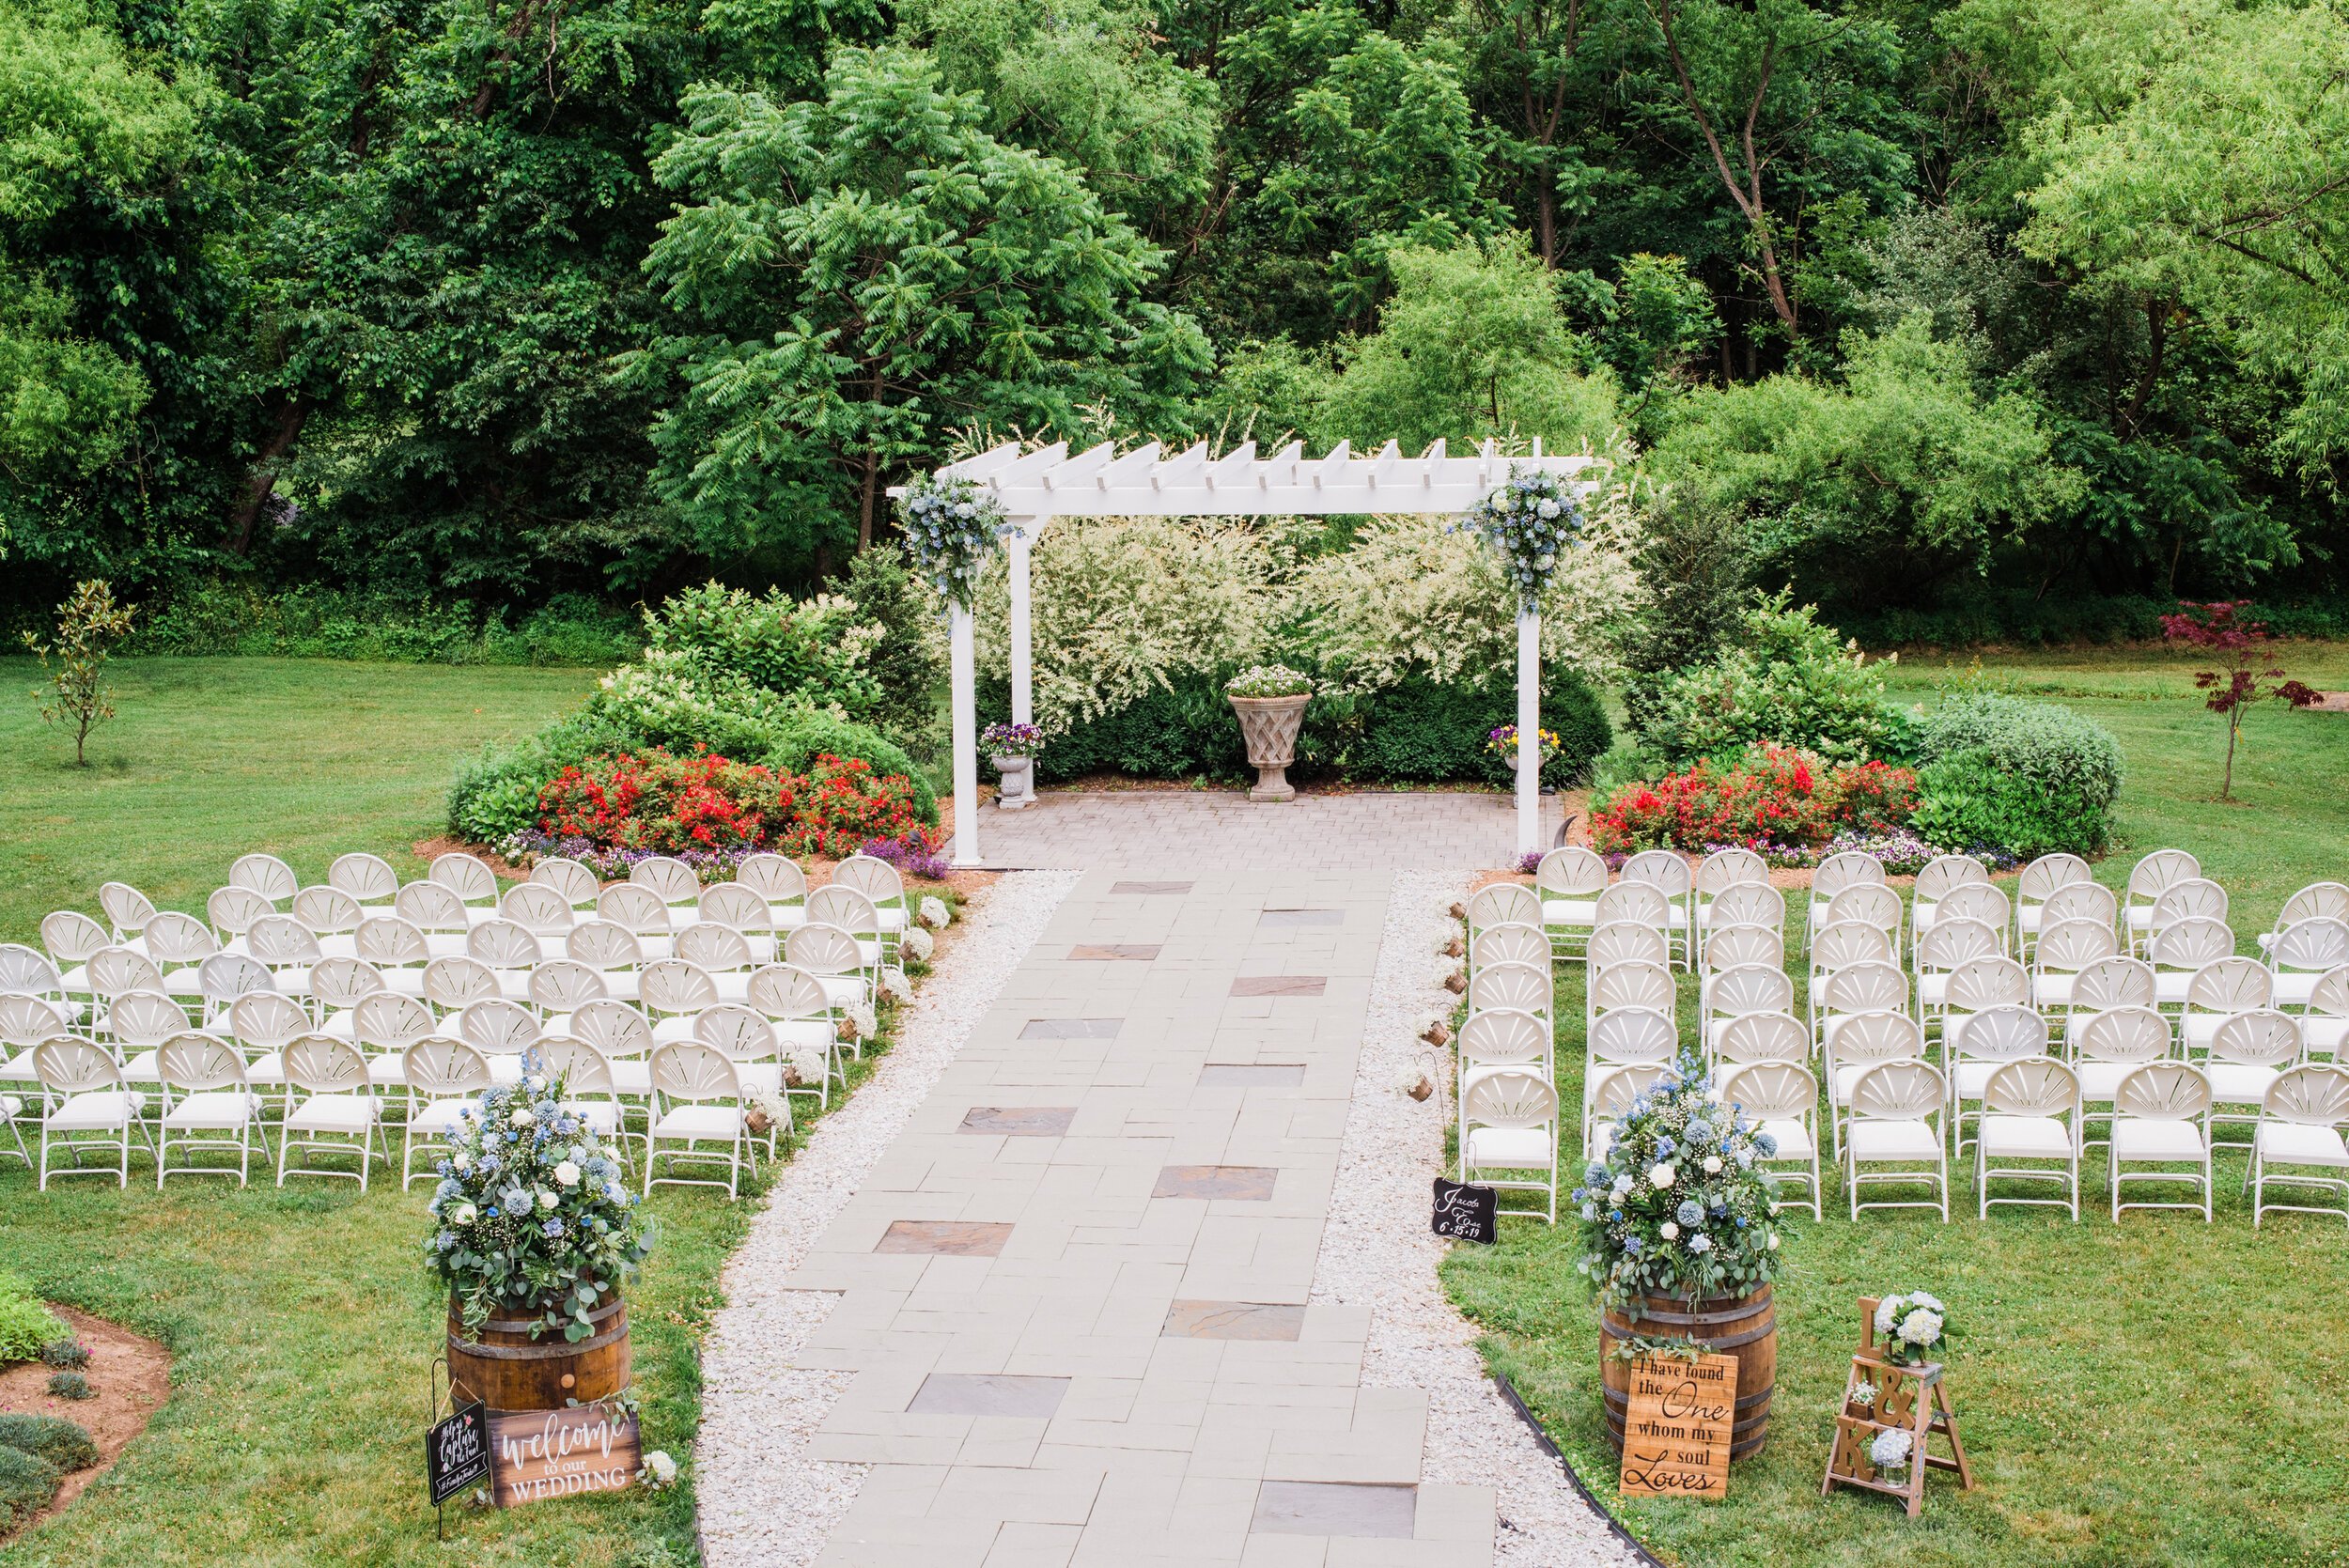 Ceremony Set Up in Wedding Garden by Symmetry Co Wedding Photography.jpeg